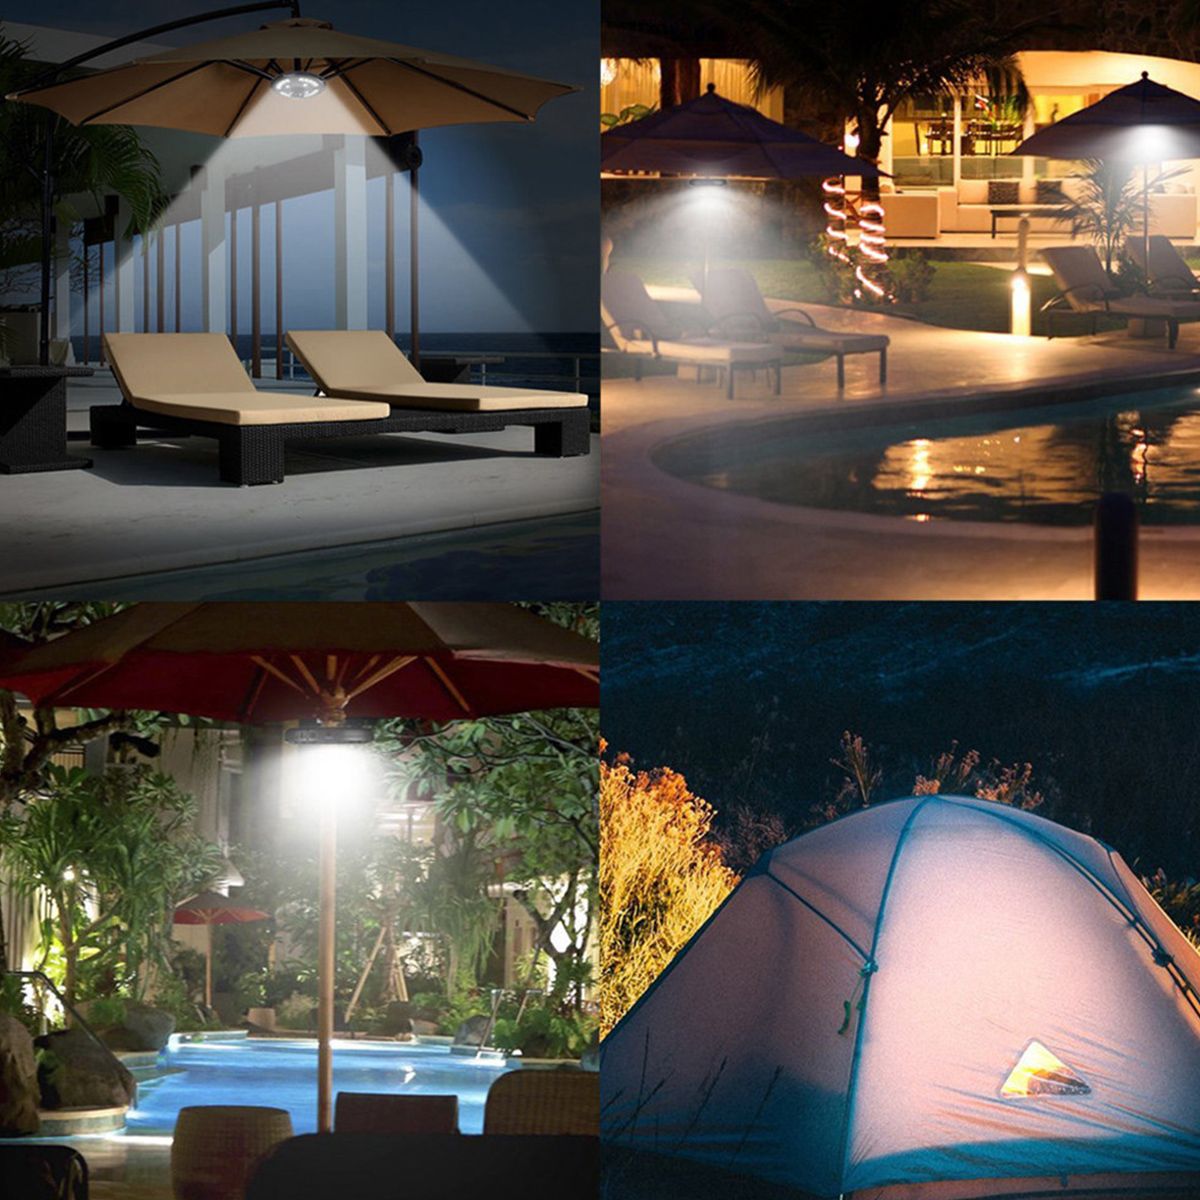 Portable-Patio-Umbrella-Pole-Lights-28-Led-Bulb-Outdoor-Garden-Yard-Lawn-Camping-Night-Lights-With-H-1715860